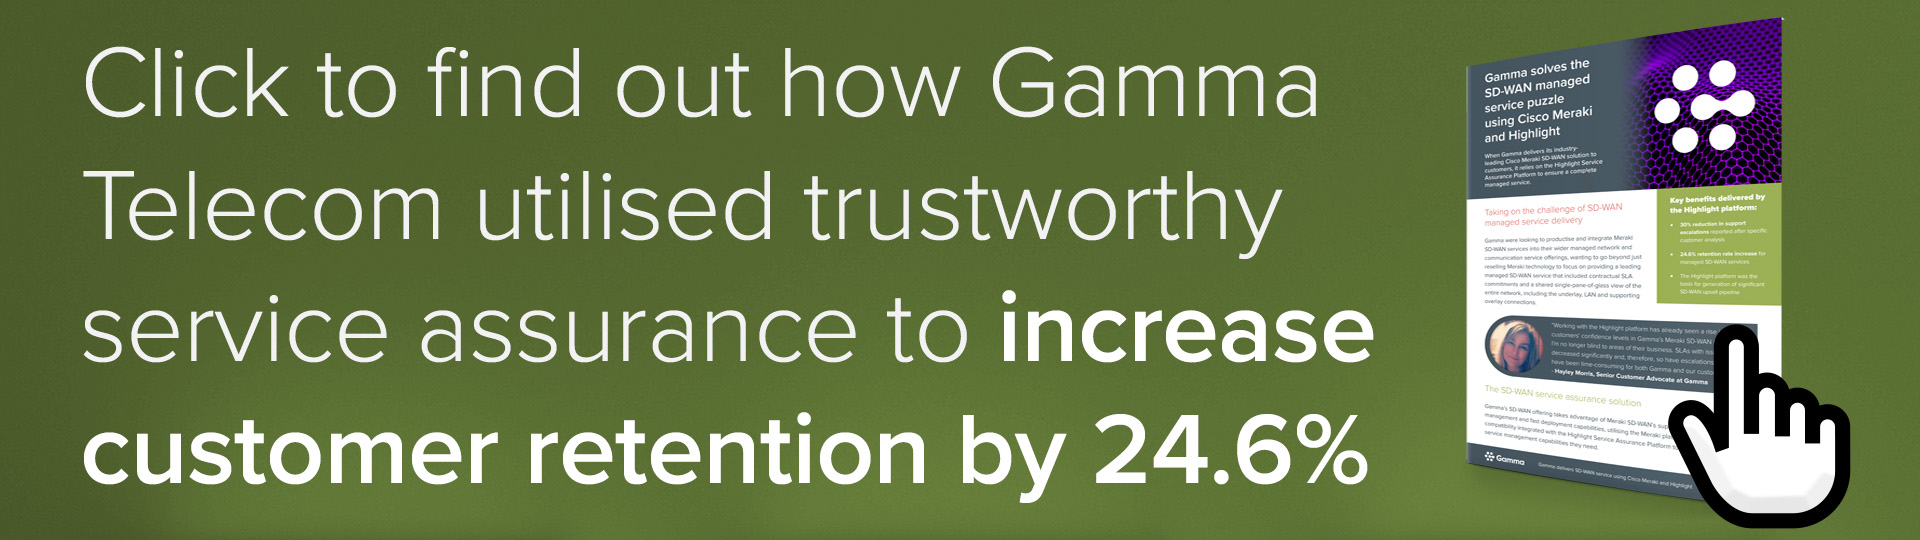 A banner advertisement with a visual representation of a case study sheet next to a finger icon, the accompanying text says, "Click to find out how Gamma Telecom utilised trustworthy service assurance to increase customer retention by 26.4%."